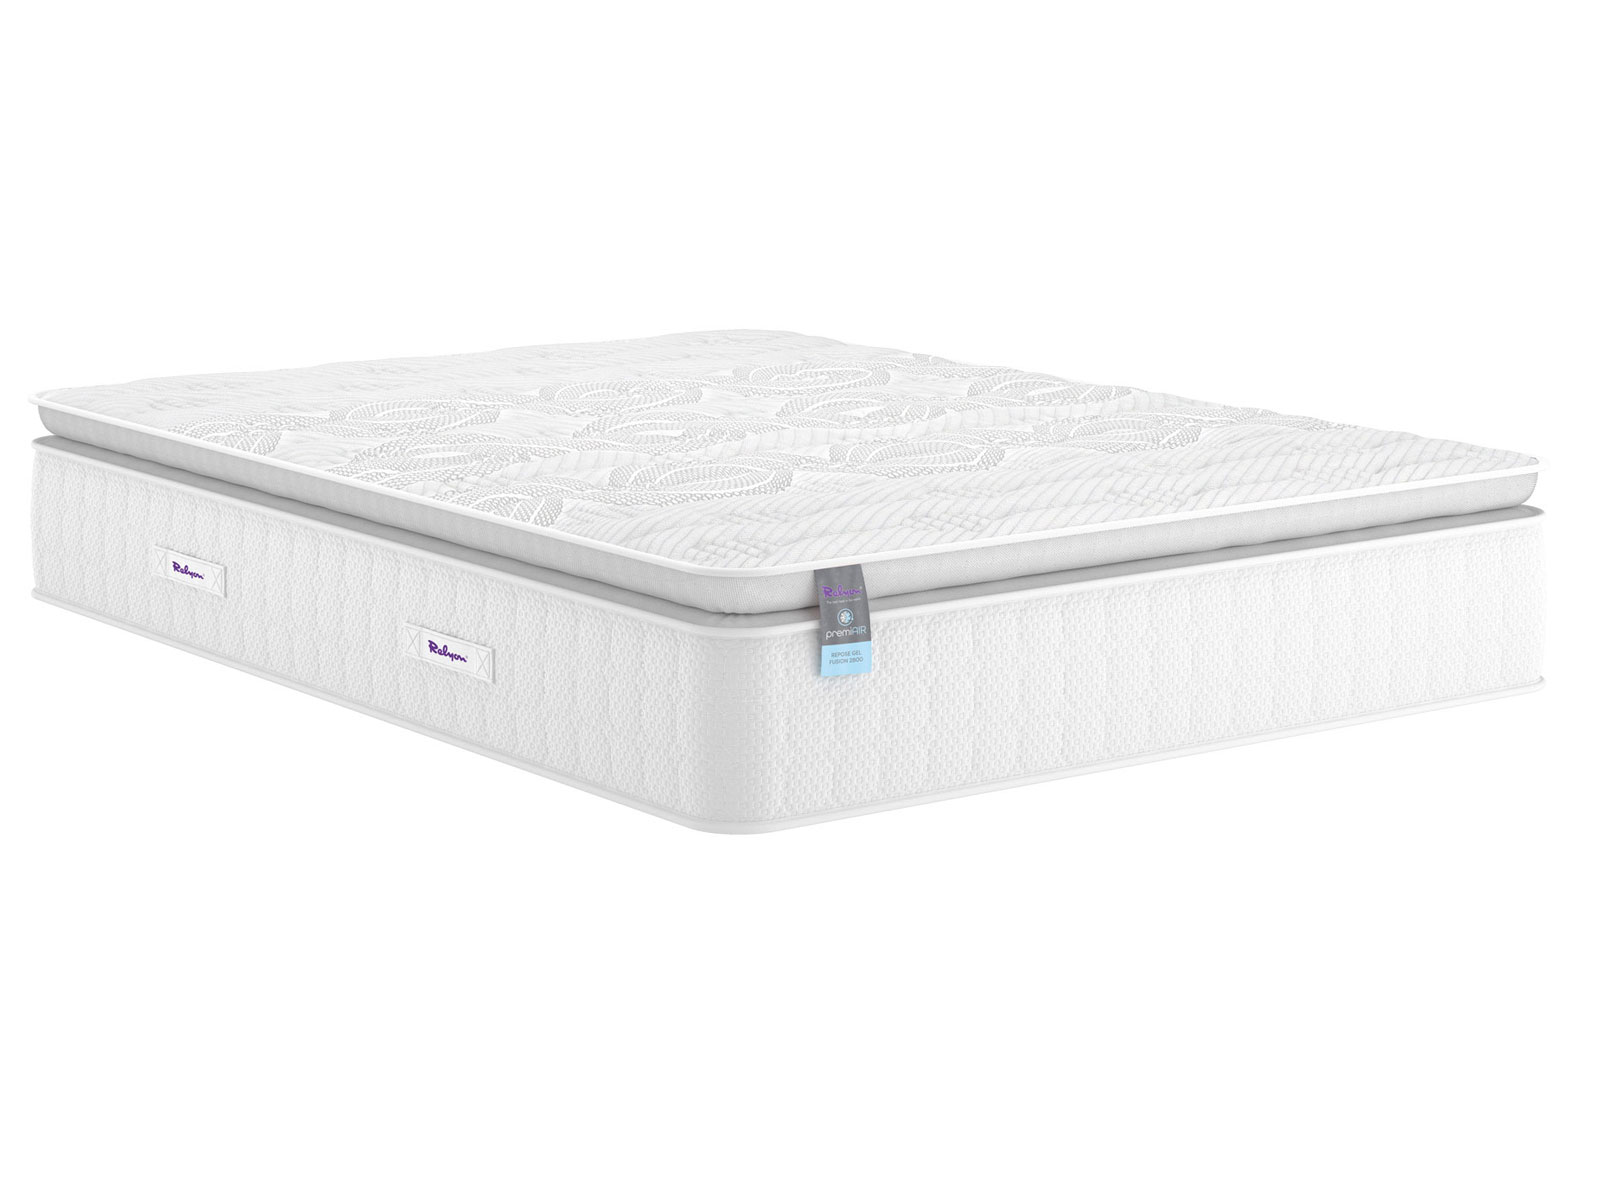 6ft Super King SIze Relyon Contemporary Gel Fusion 2800 Mattress